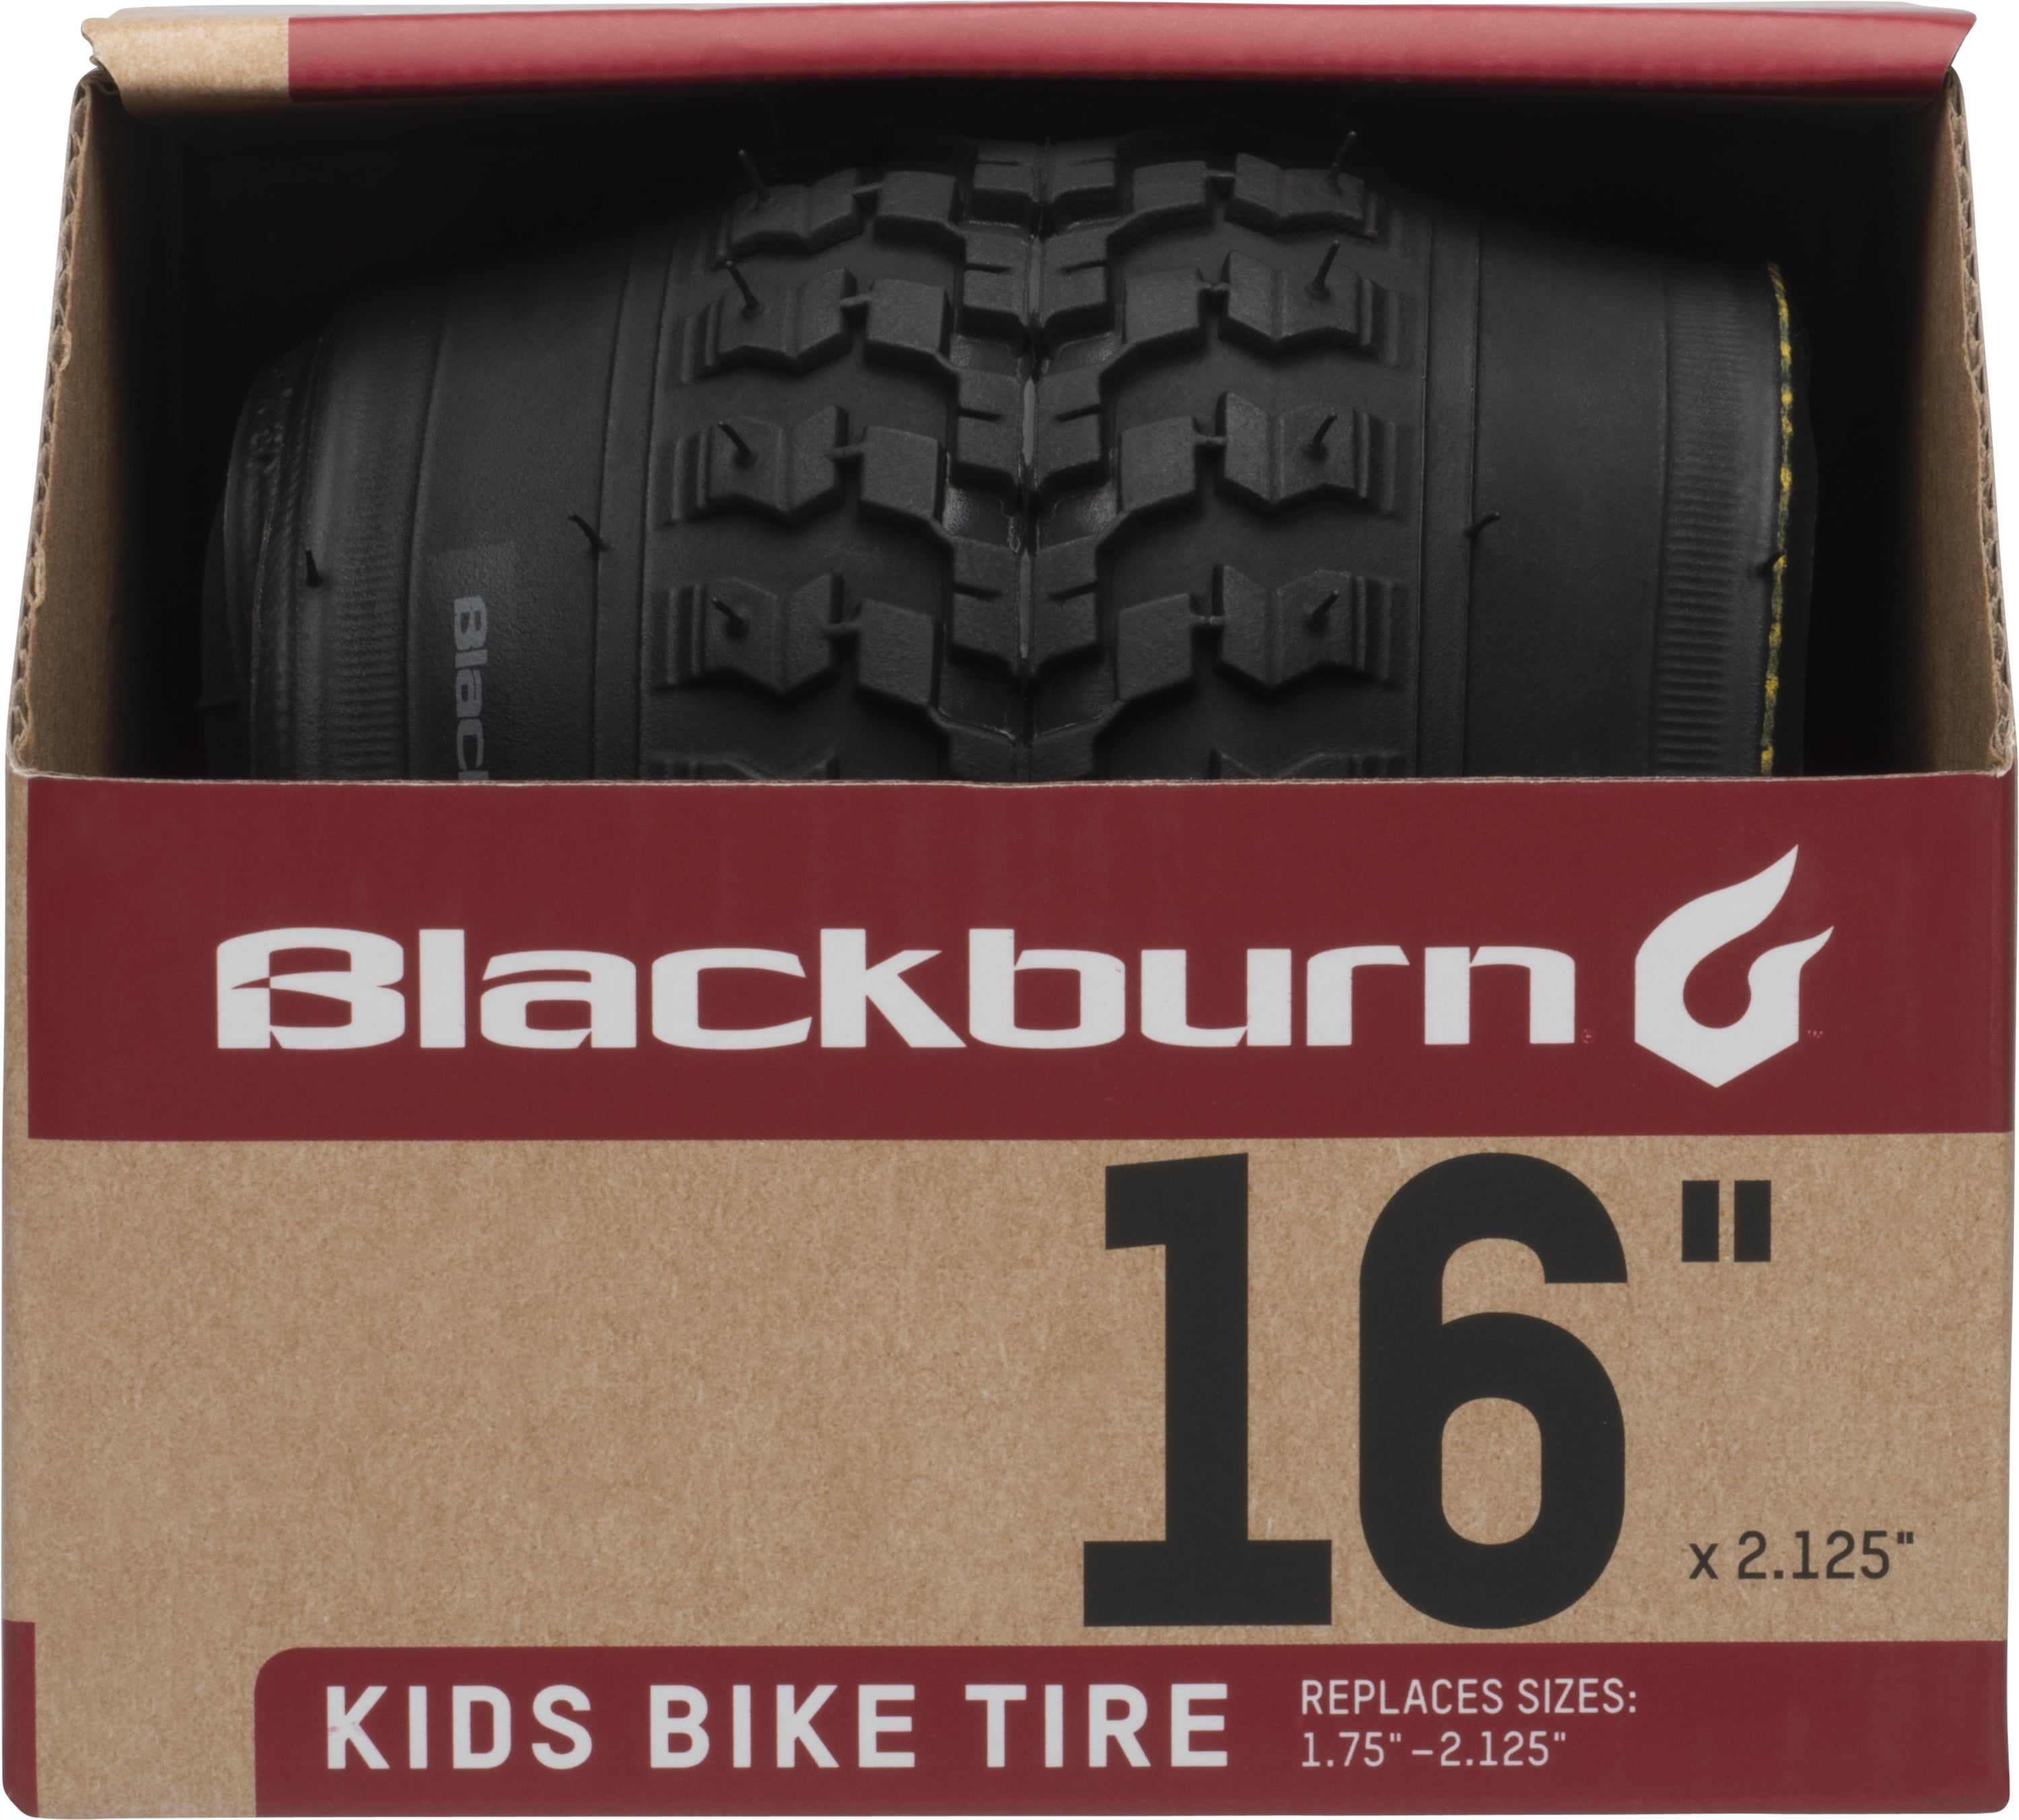 PURPLE BICYCLE TIRES KIDS DURO 16"x2.125" 57-305 TWO 2 